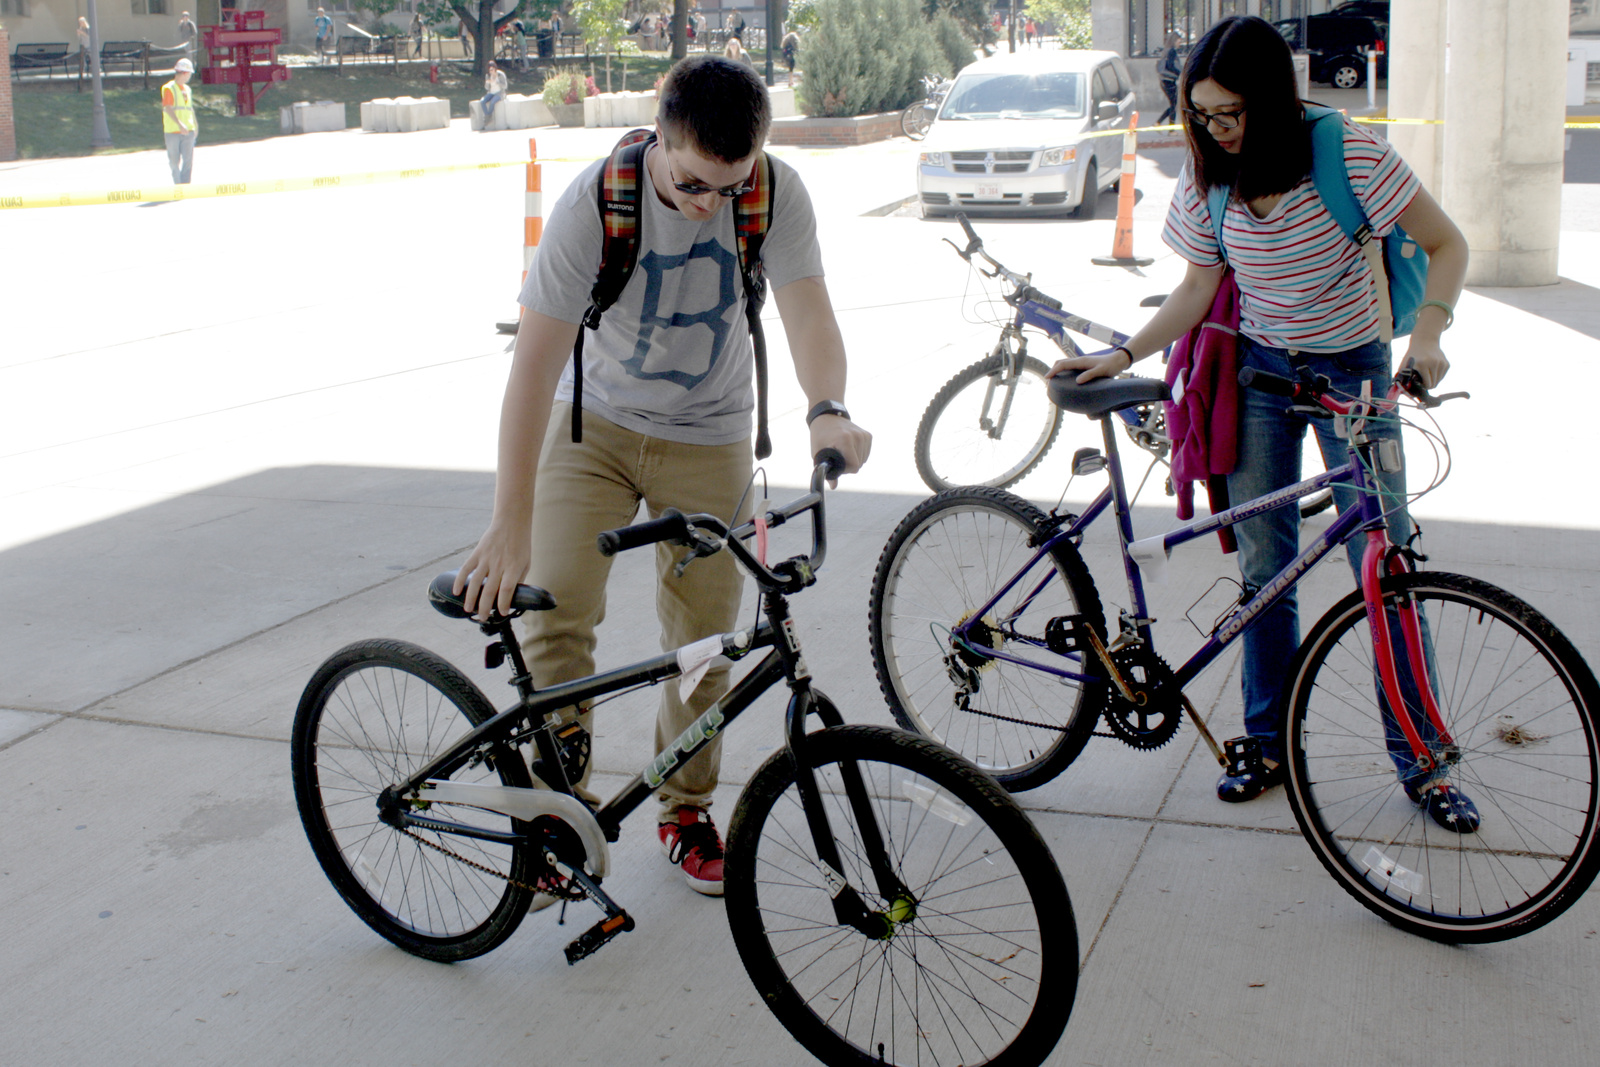 Ohio State rakes in nearly $3K from selling used bikes